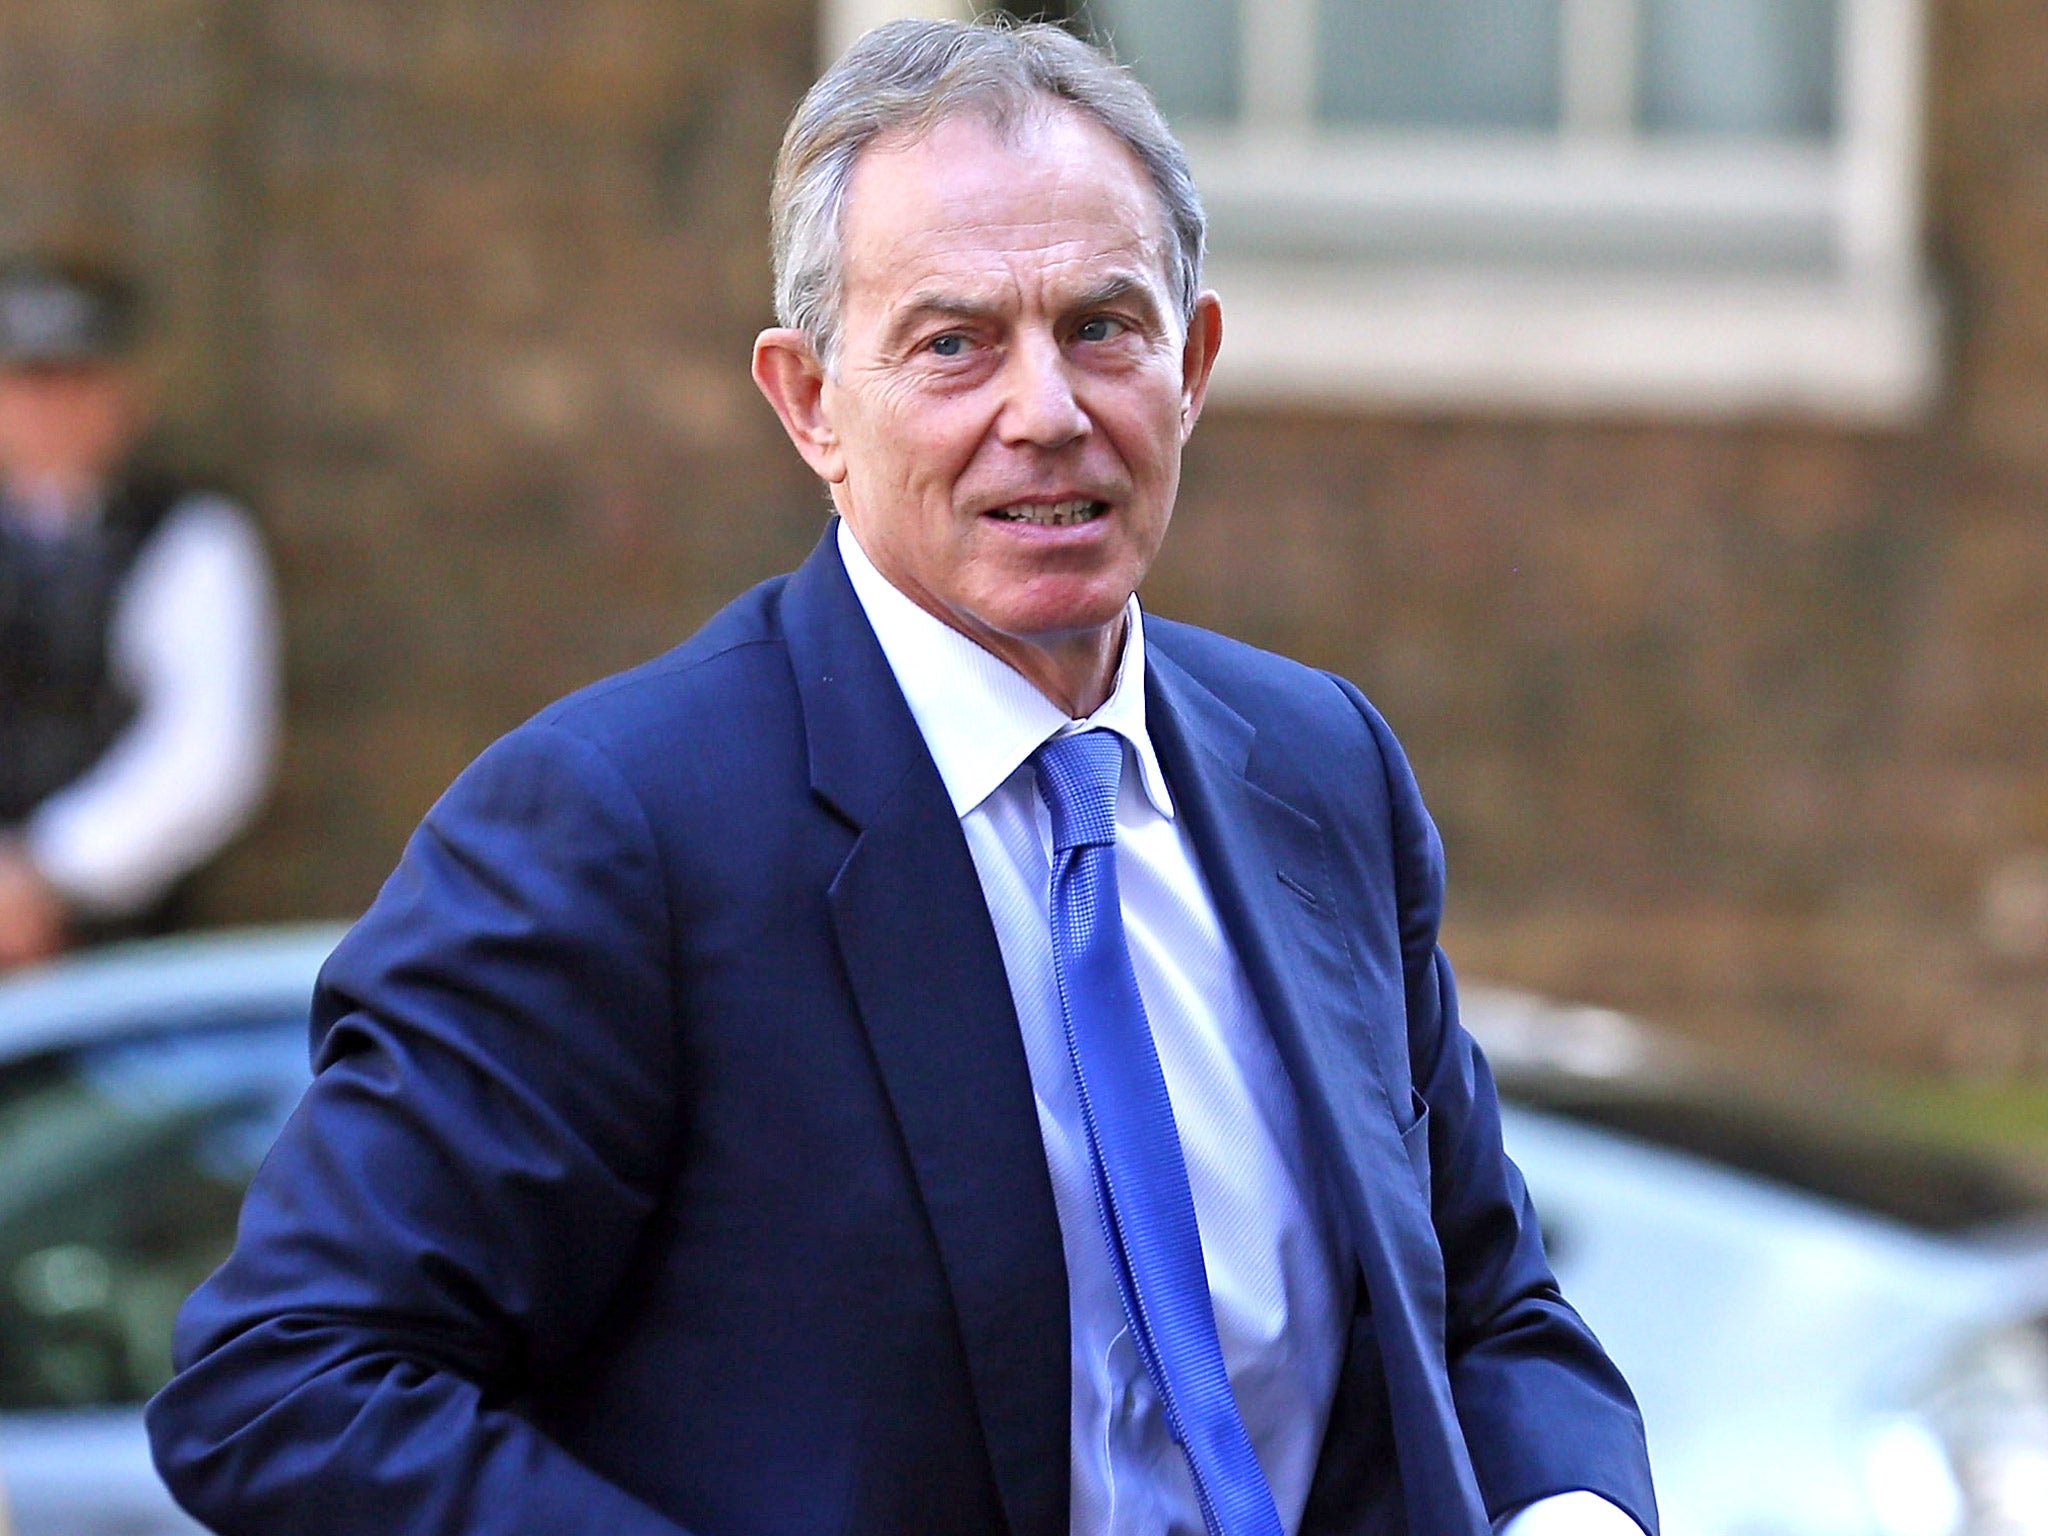 Former prime minister Tony Blair has said Labour would have stood more chance of victory if he had led the party into the 2010 general election